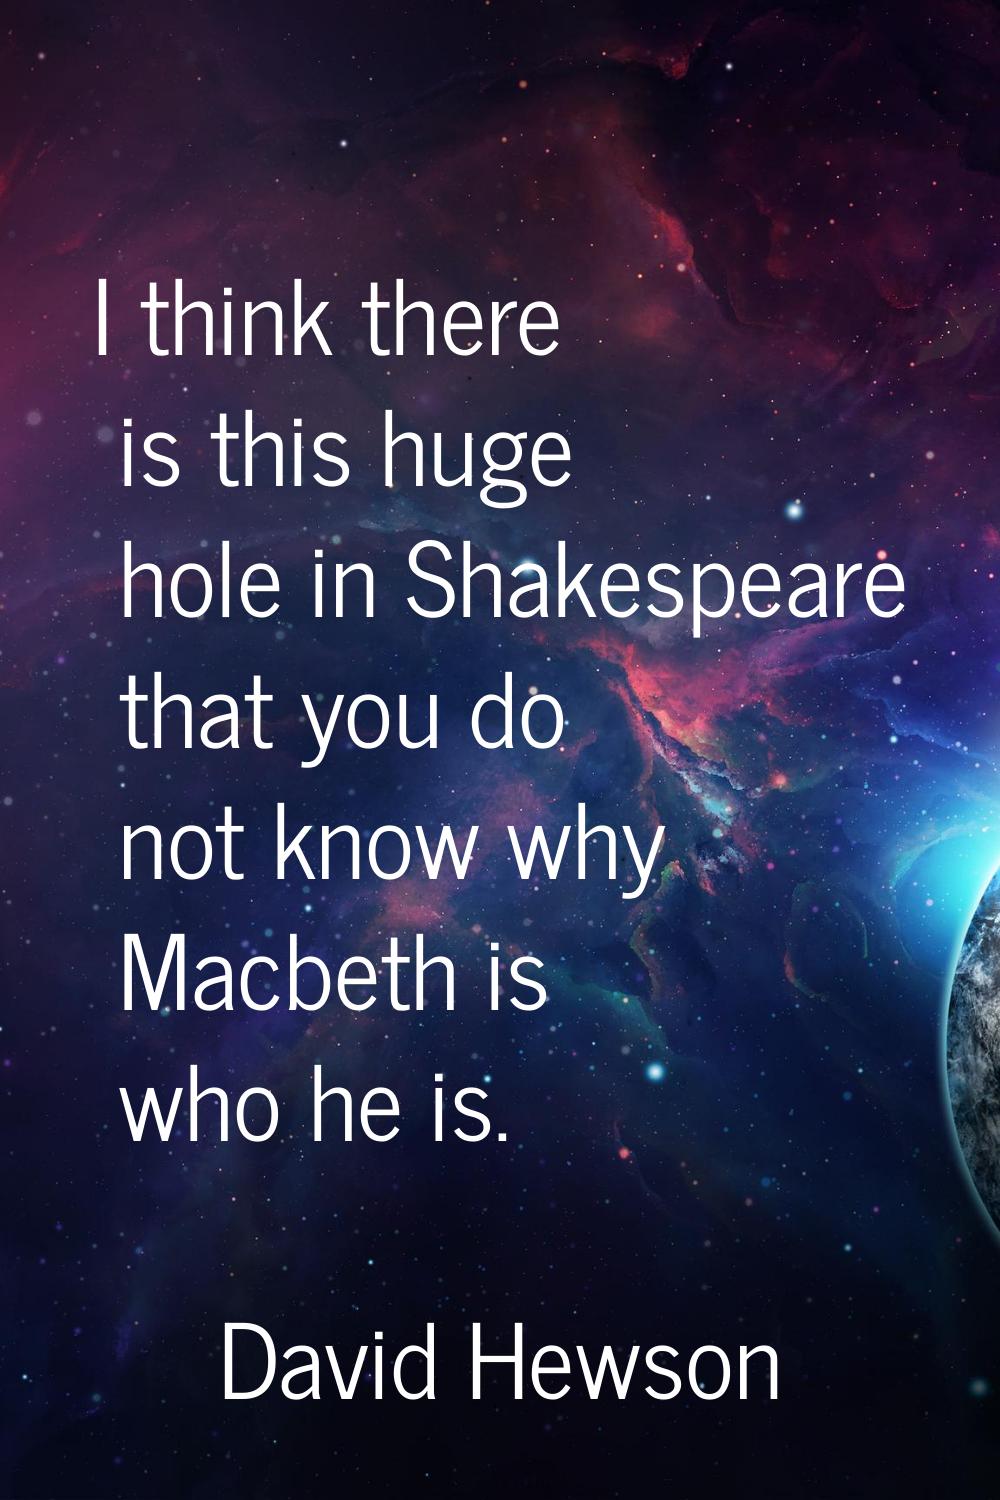 I think there is this huge hole in Shakespeare that you do not know why Macbeth is who he is.